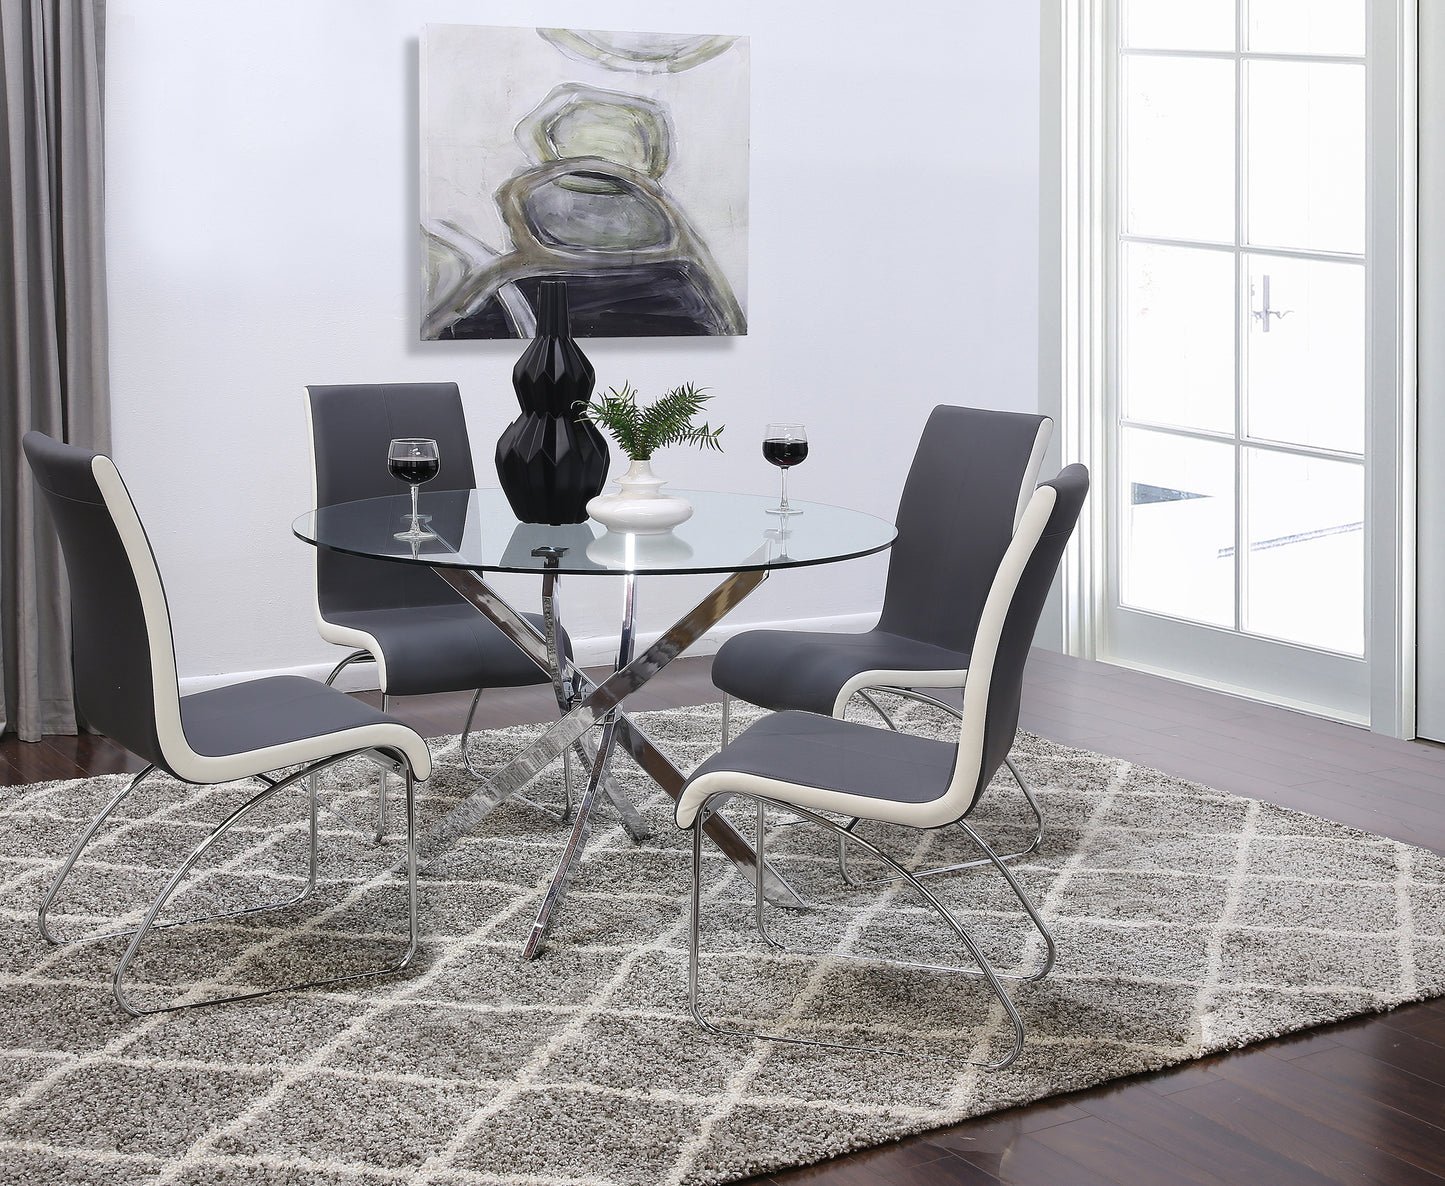 Lila 5 Piece Dining Set with Grey Chairs